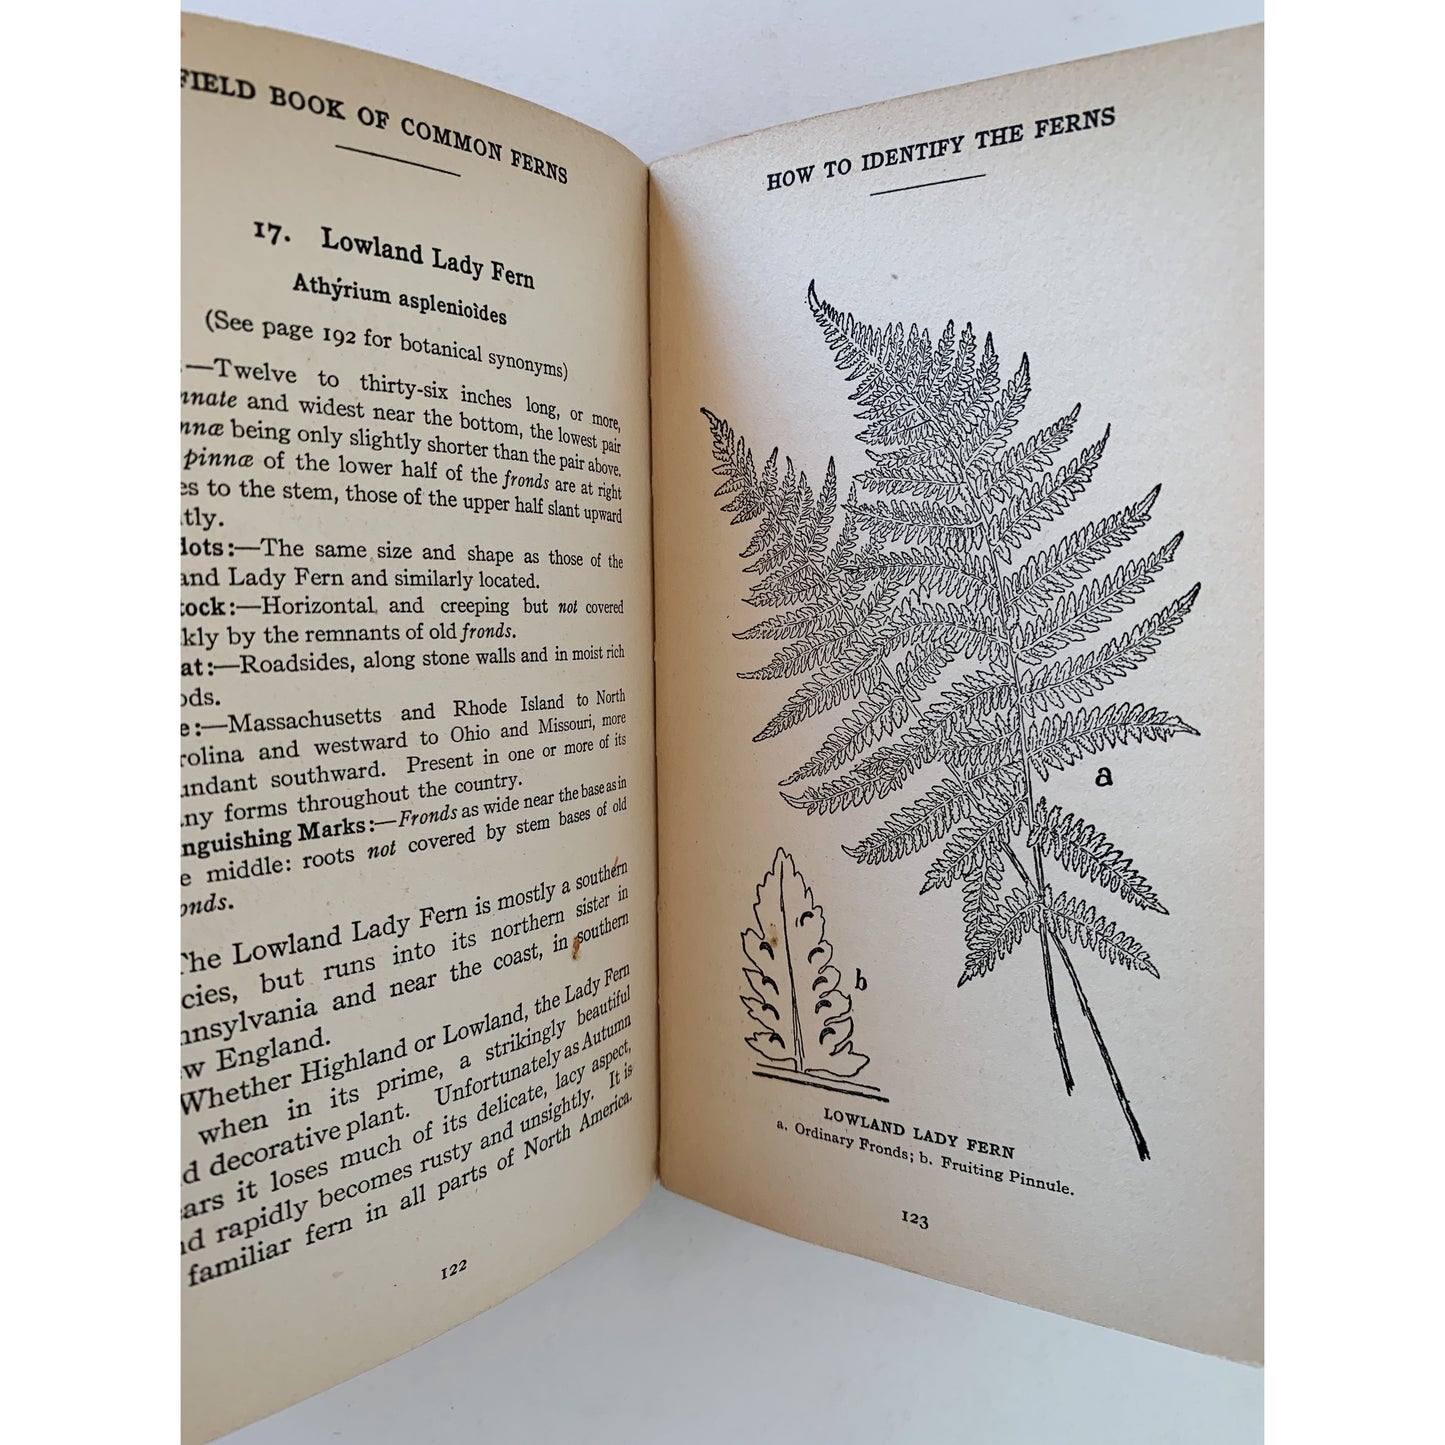 Field Book of Common Ferns, Eastern America, 1928